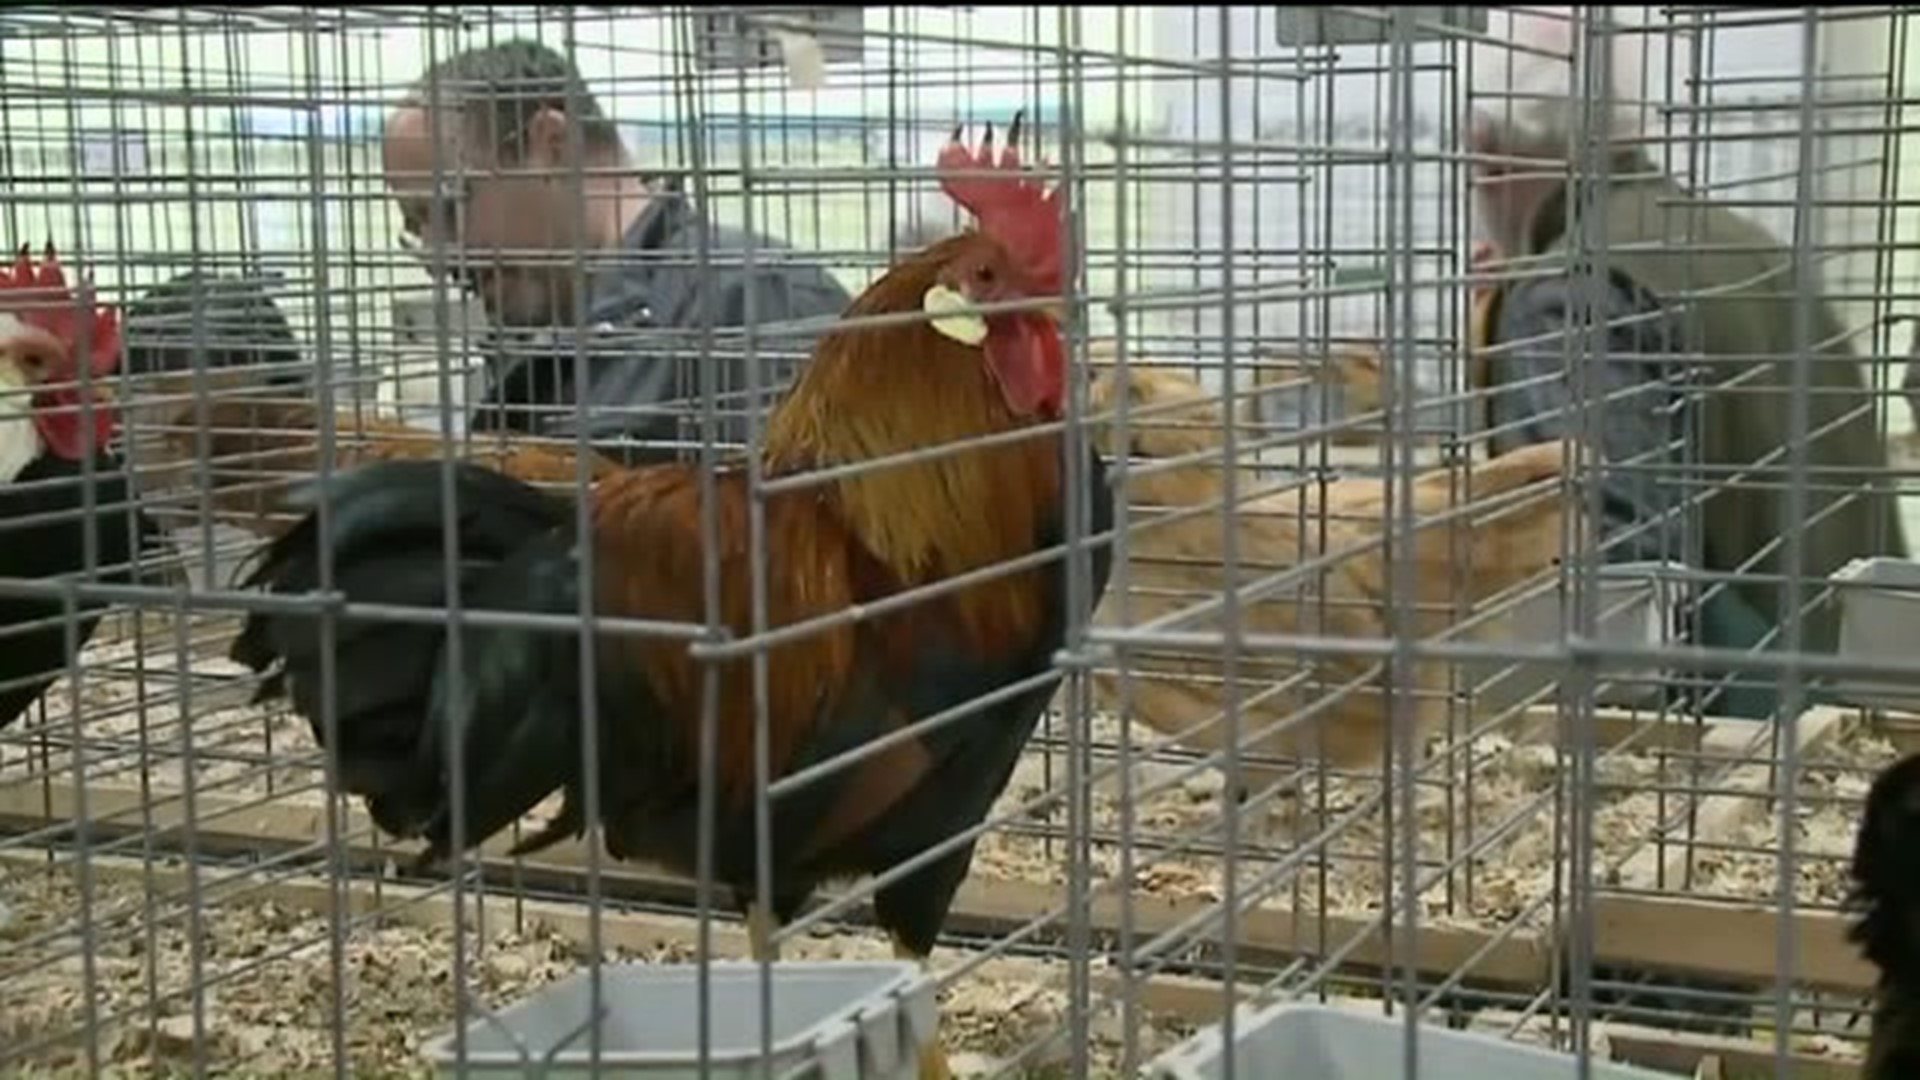 The Birds are Back at the Farm Show